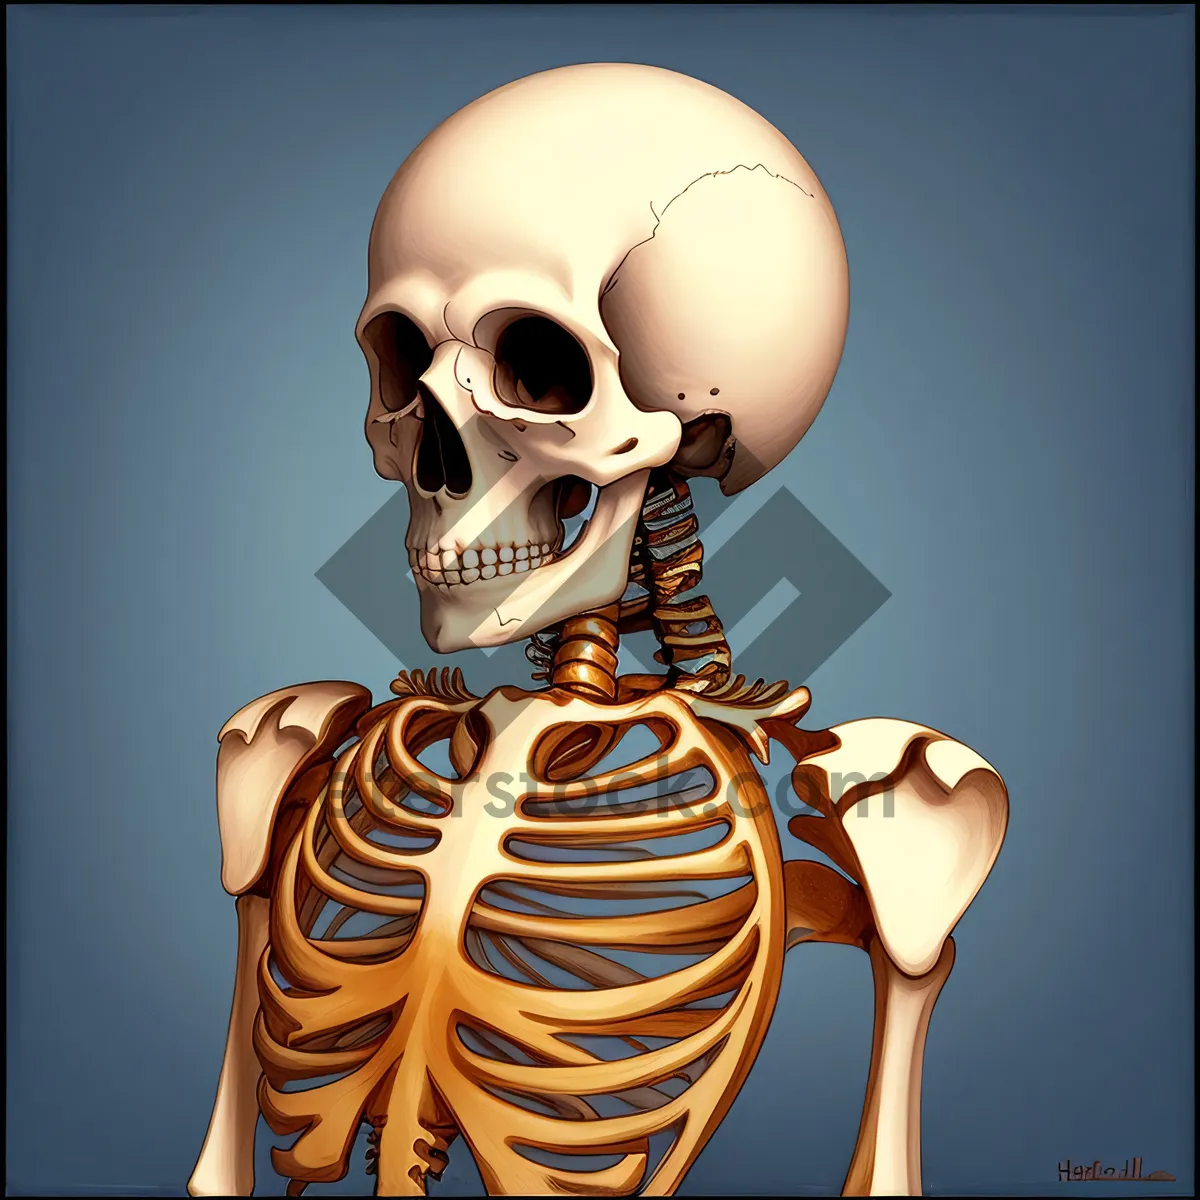 Picture of Terrifying skeletal head sculpture with spooky pose